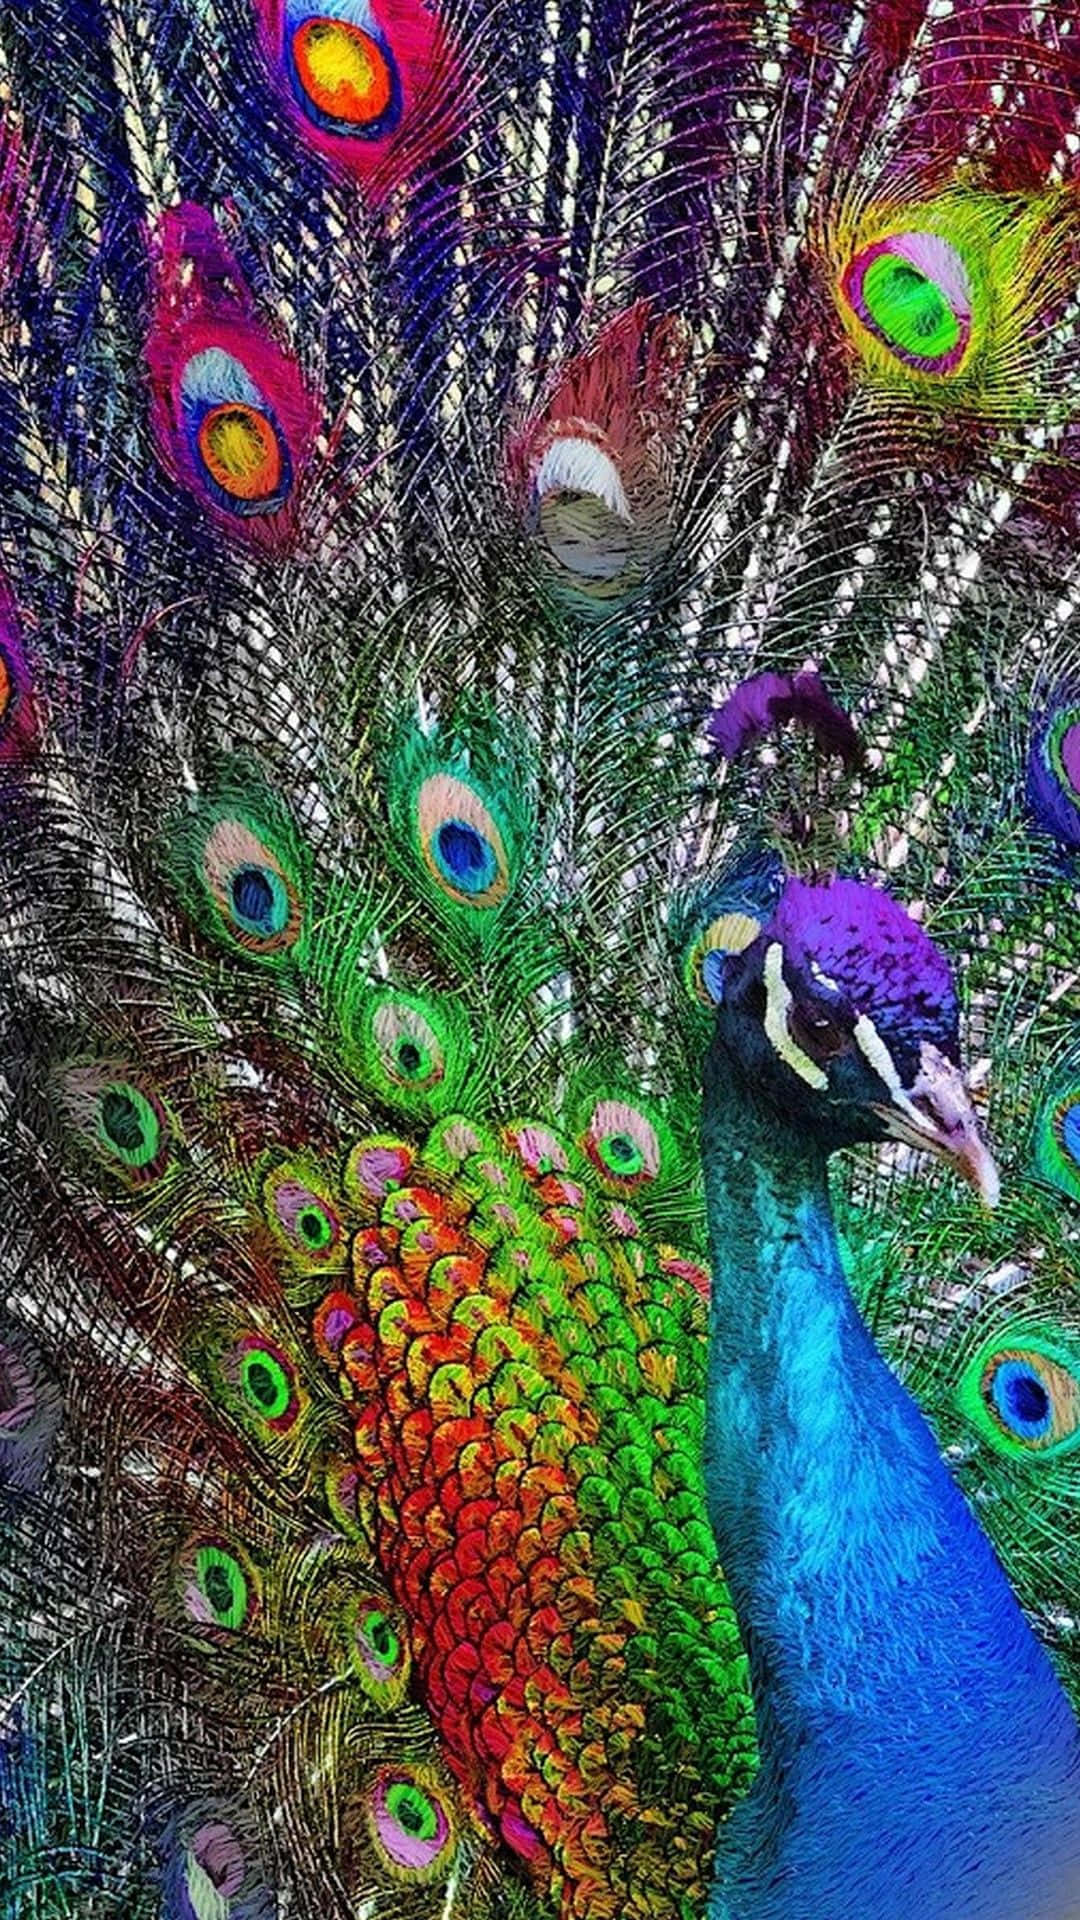 Majestic Peacock Displaying Vibrant Feathers